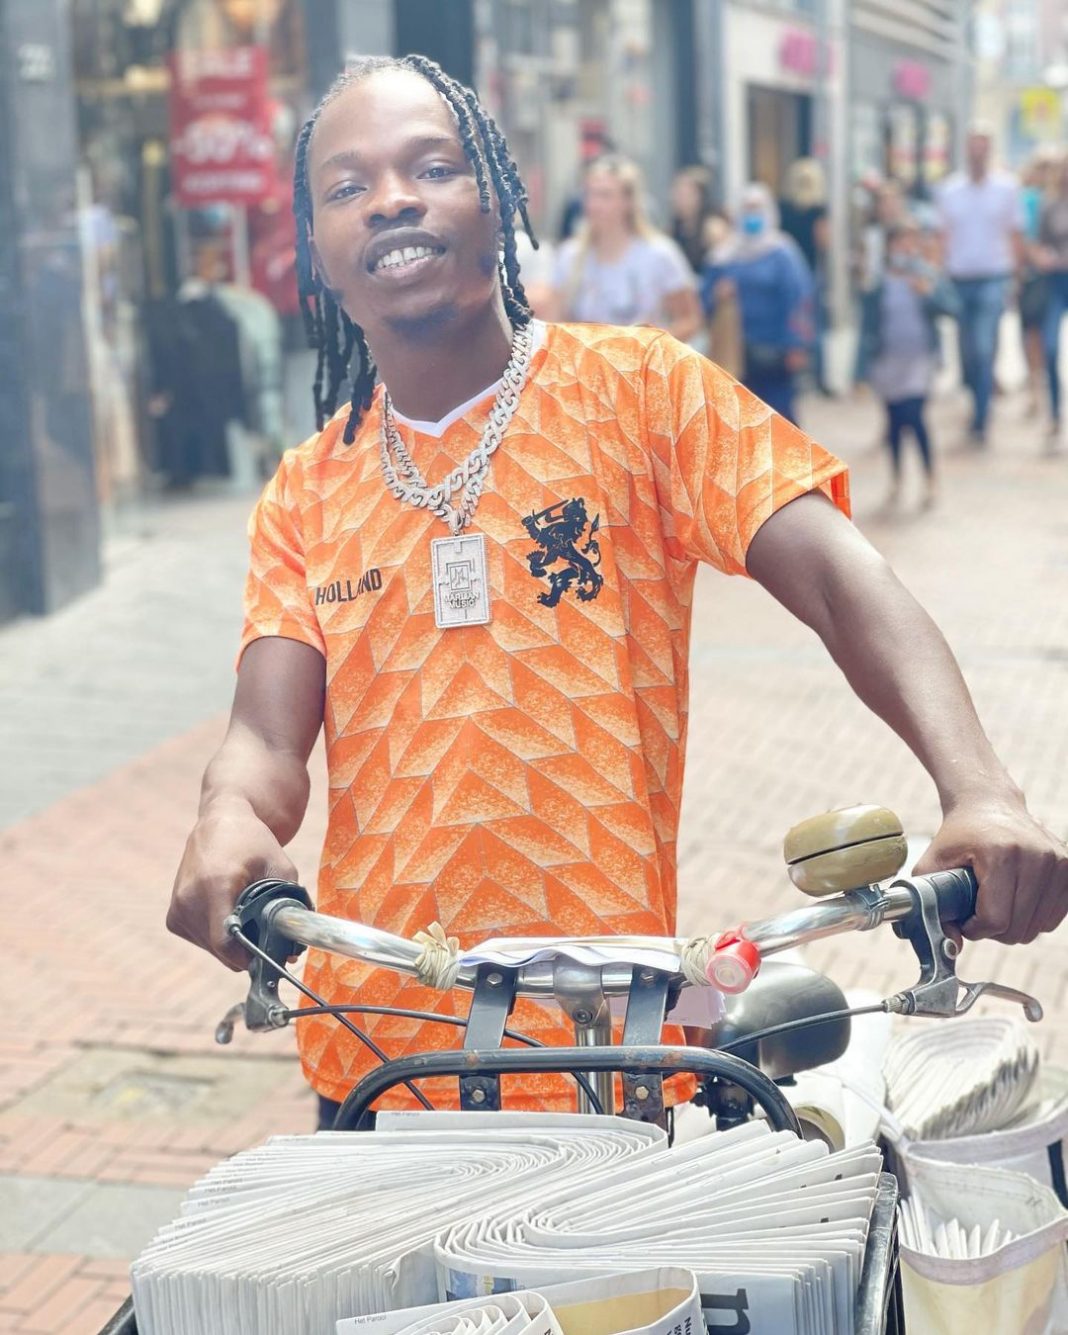 Naira Marley Announces Release Date For Debut Album In ‘Presidential’ Video